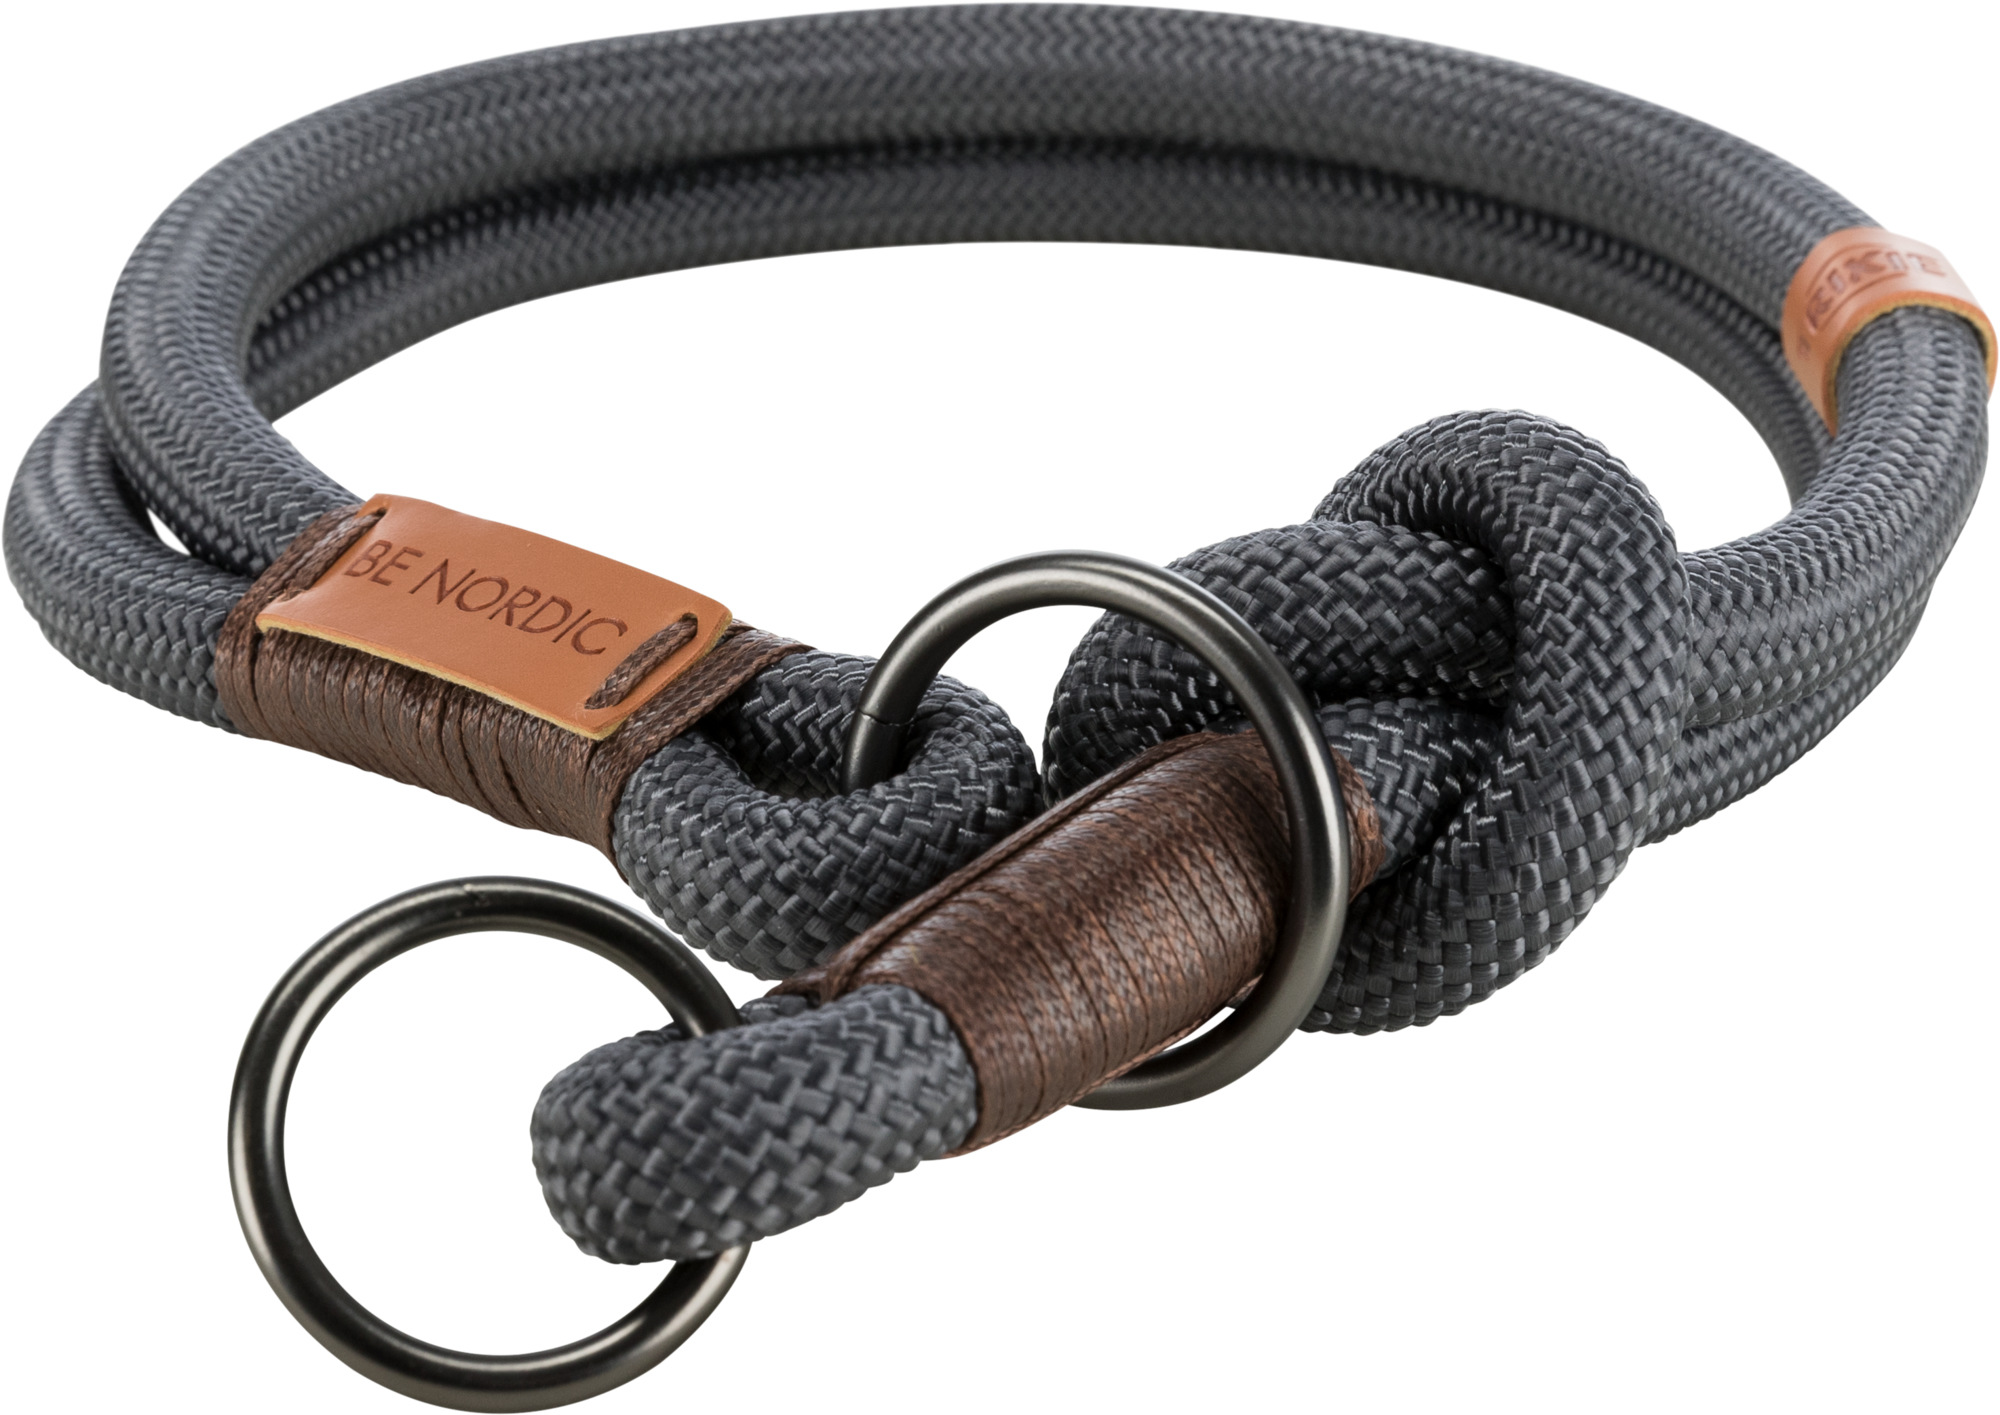 TRIXIE BE NORDIC Zug-Stopp-Halsband TRIXIE BE NORDIC Zug-Stopp-Halsband, L: 50 cm/ø 13 mm, dunkelgrau/braun